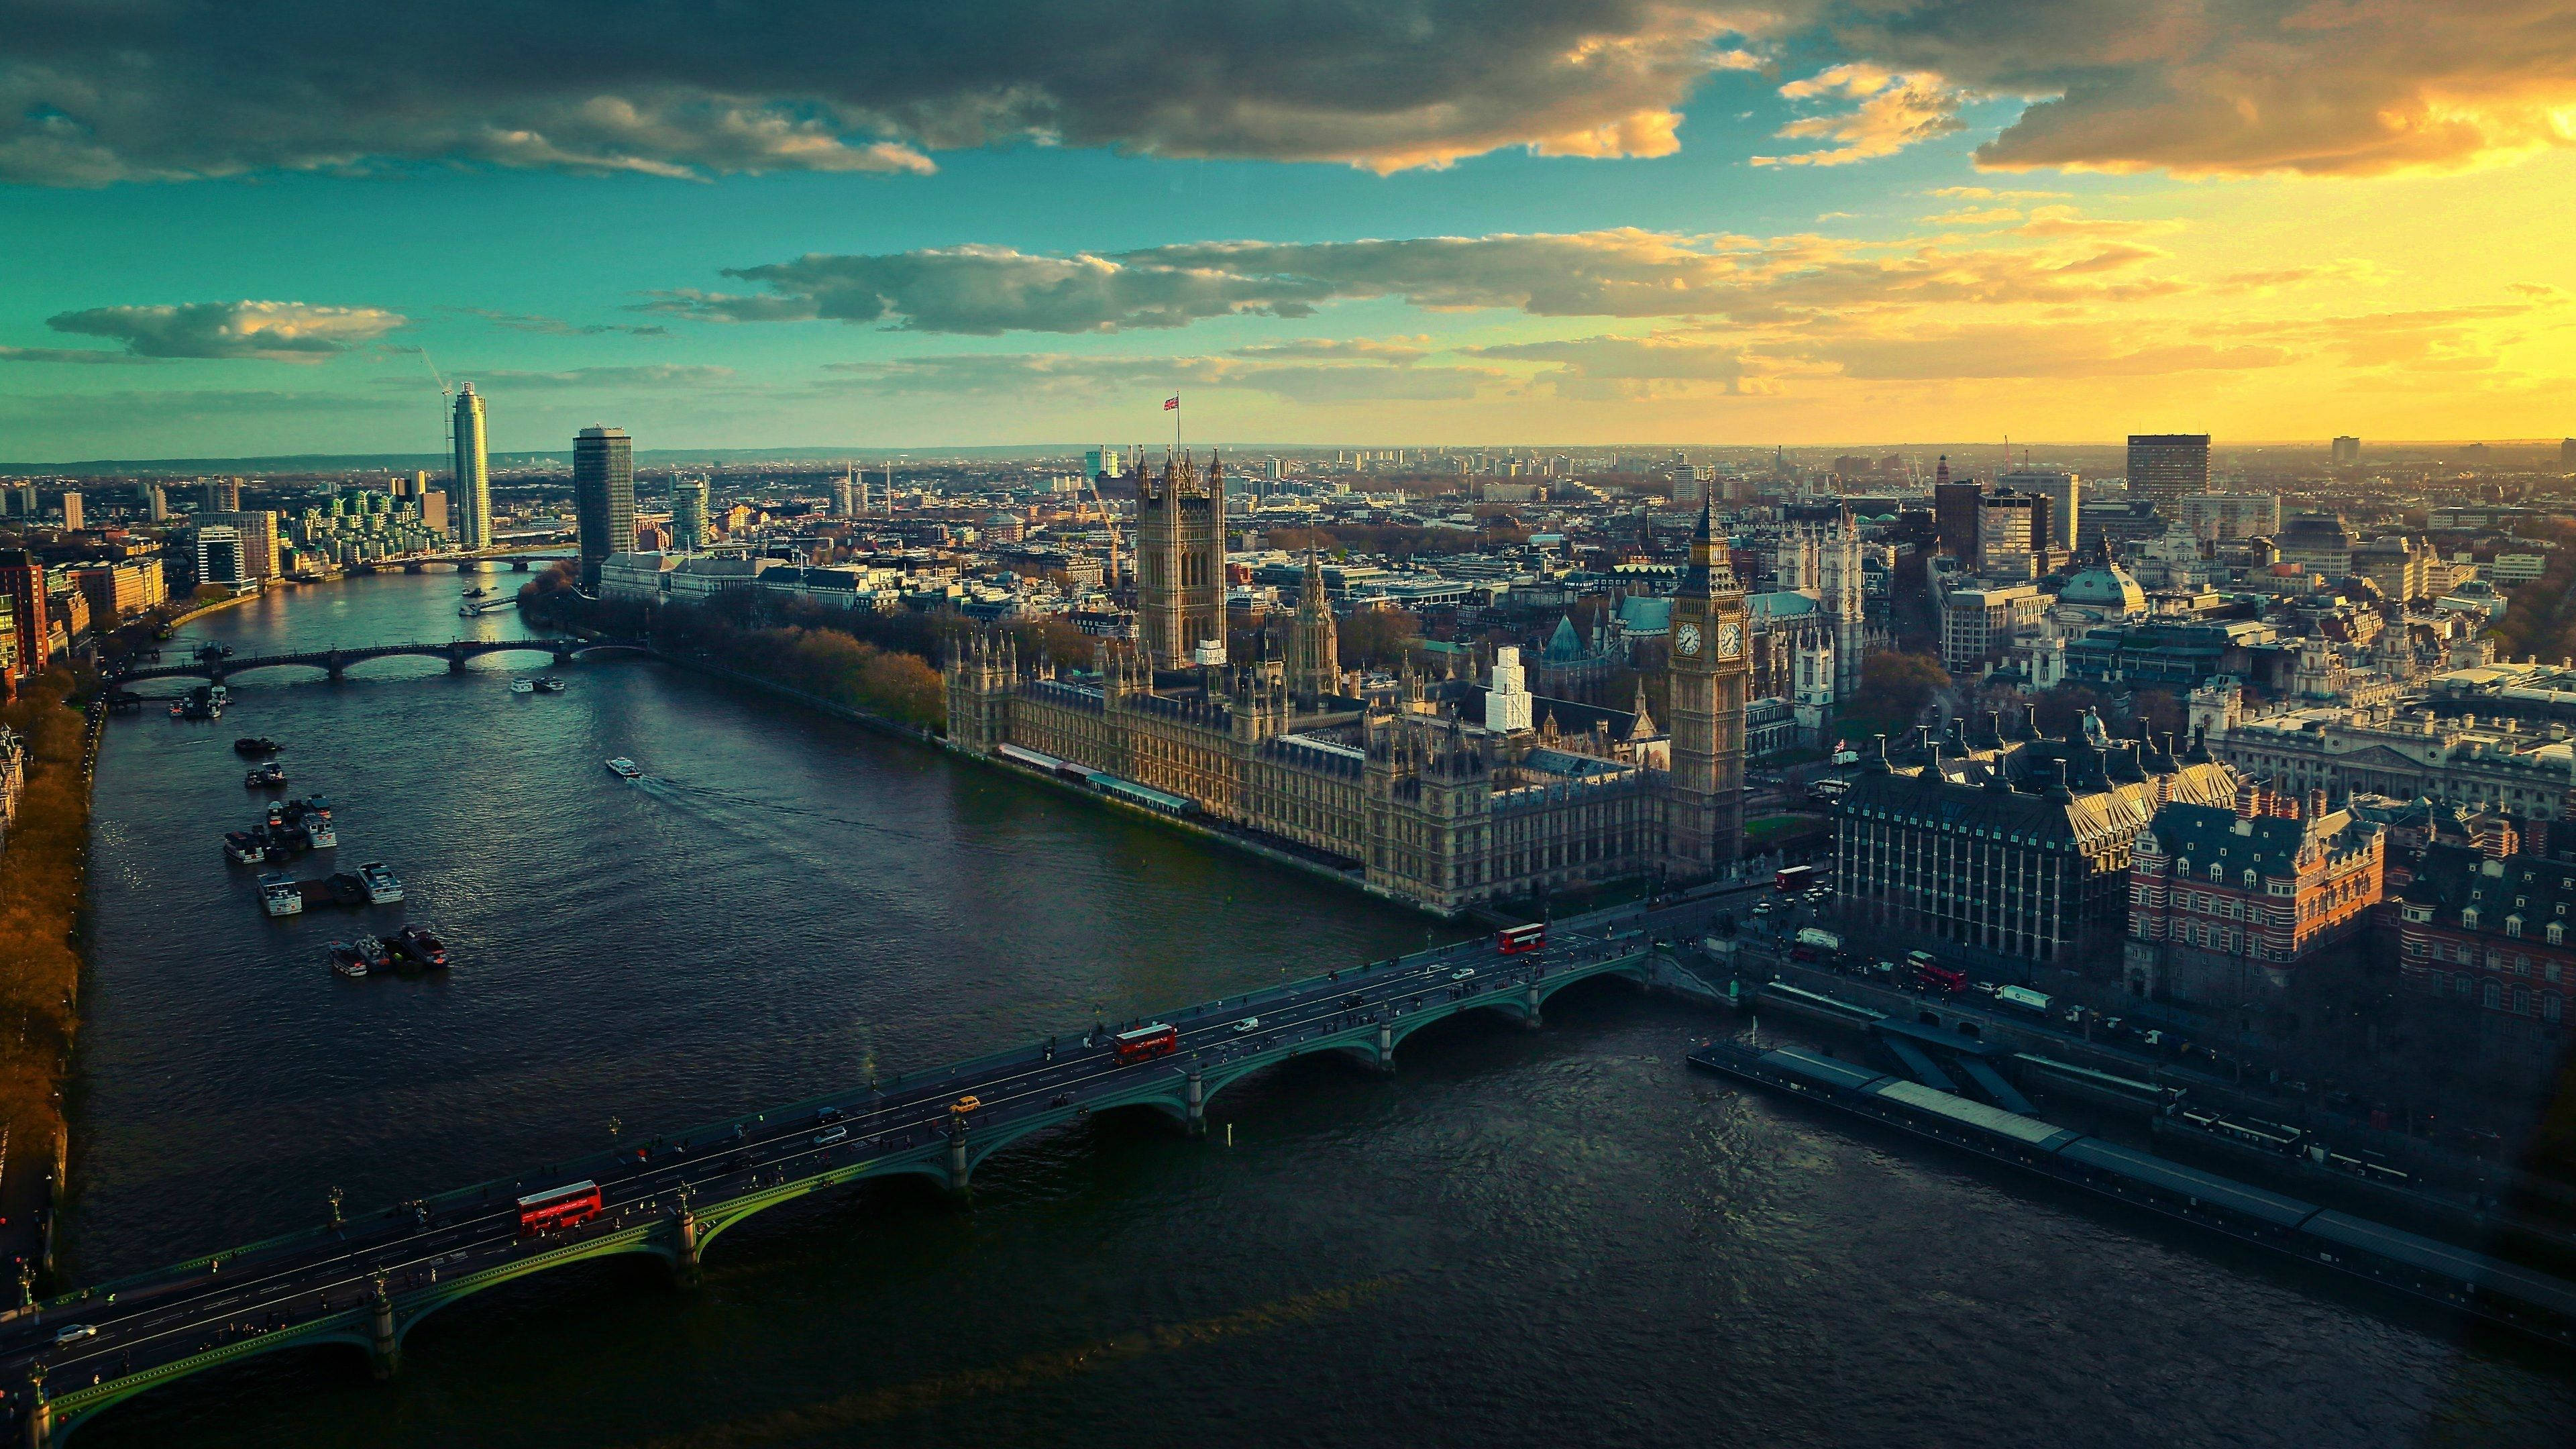 Download Ultra Hd London And River Thames Laptop Wallpaper 